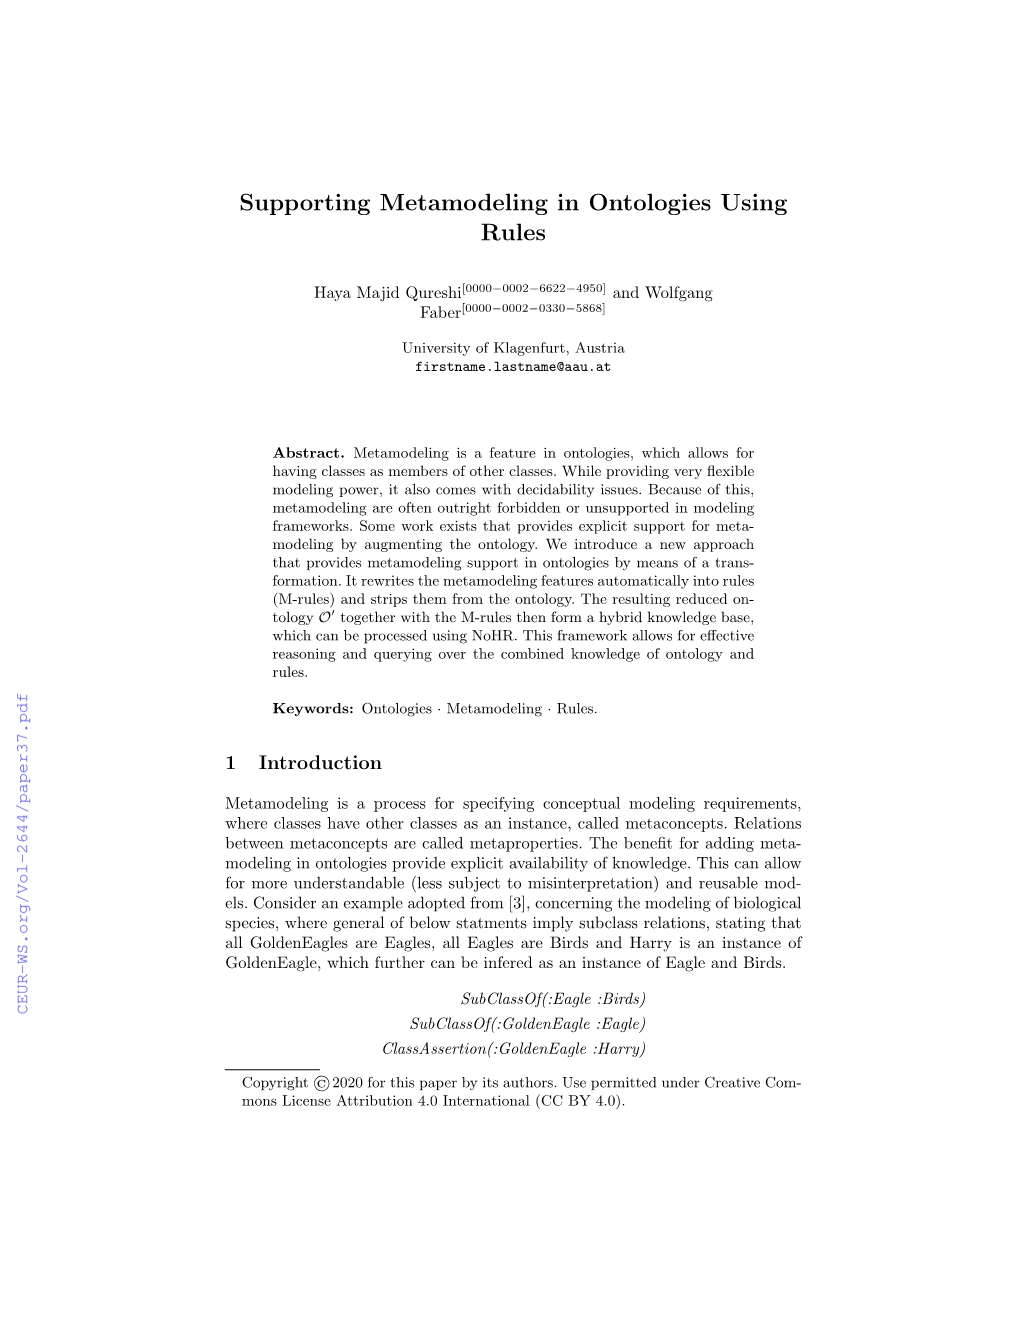 Supporting Metamodeling in Ontologies Using Rules